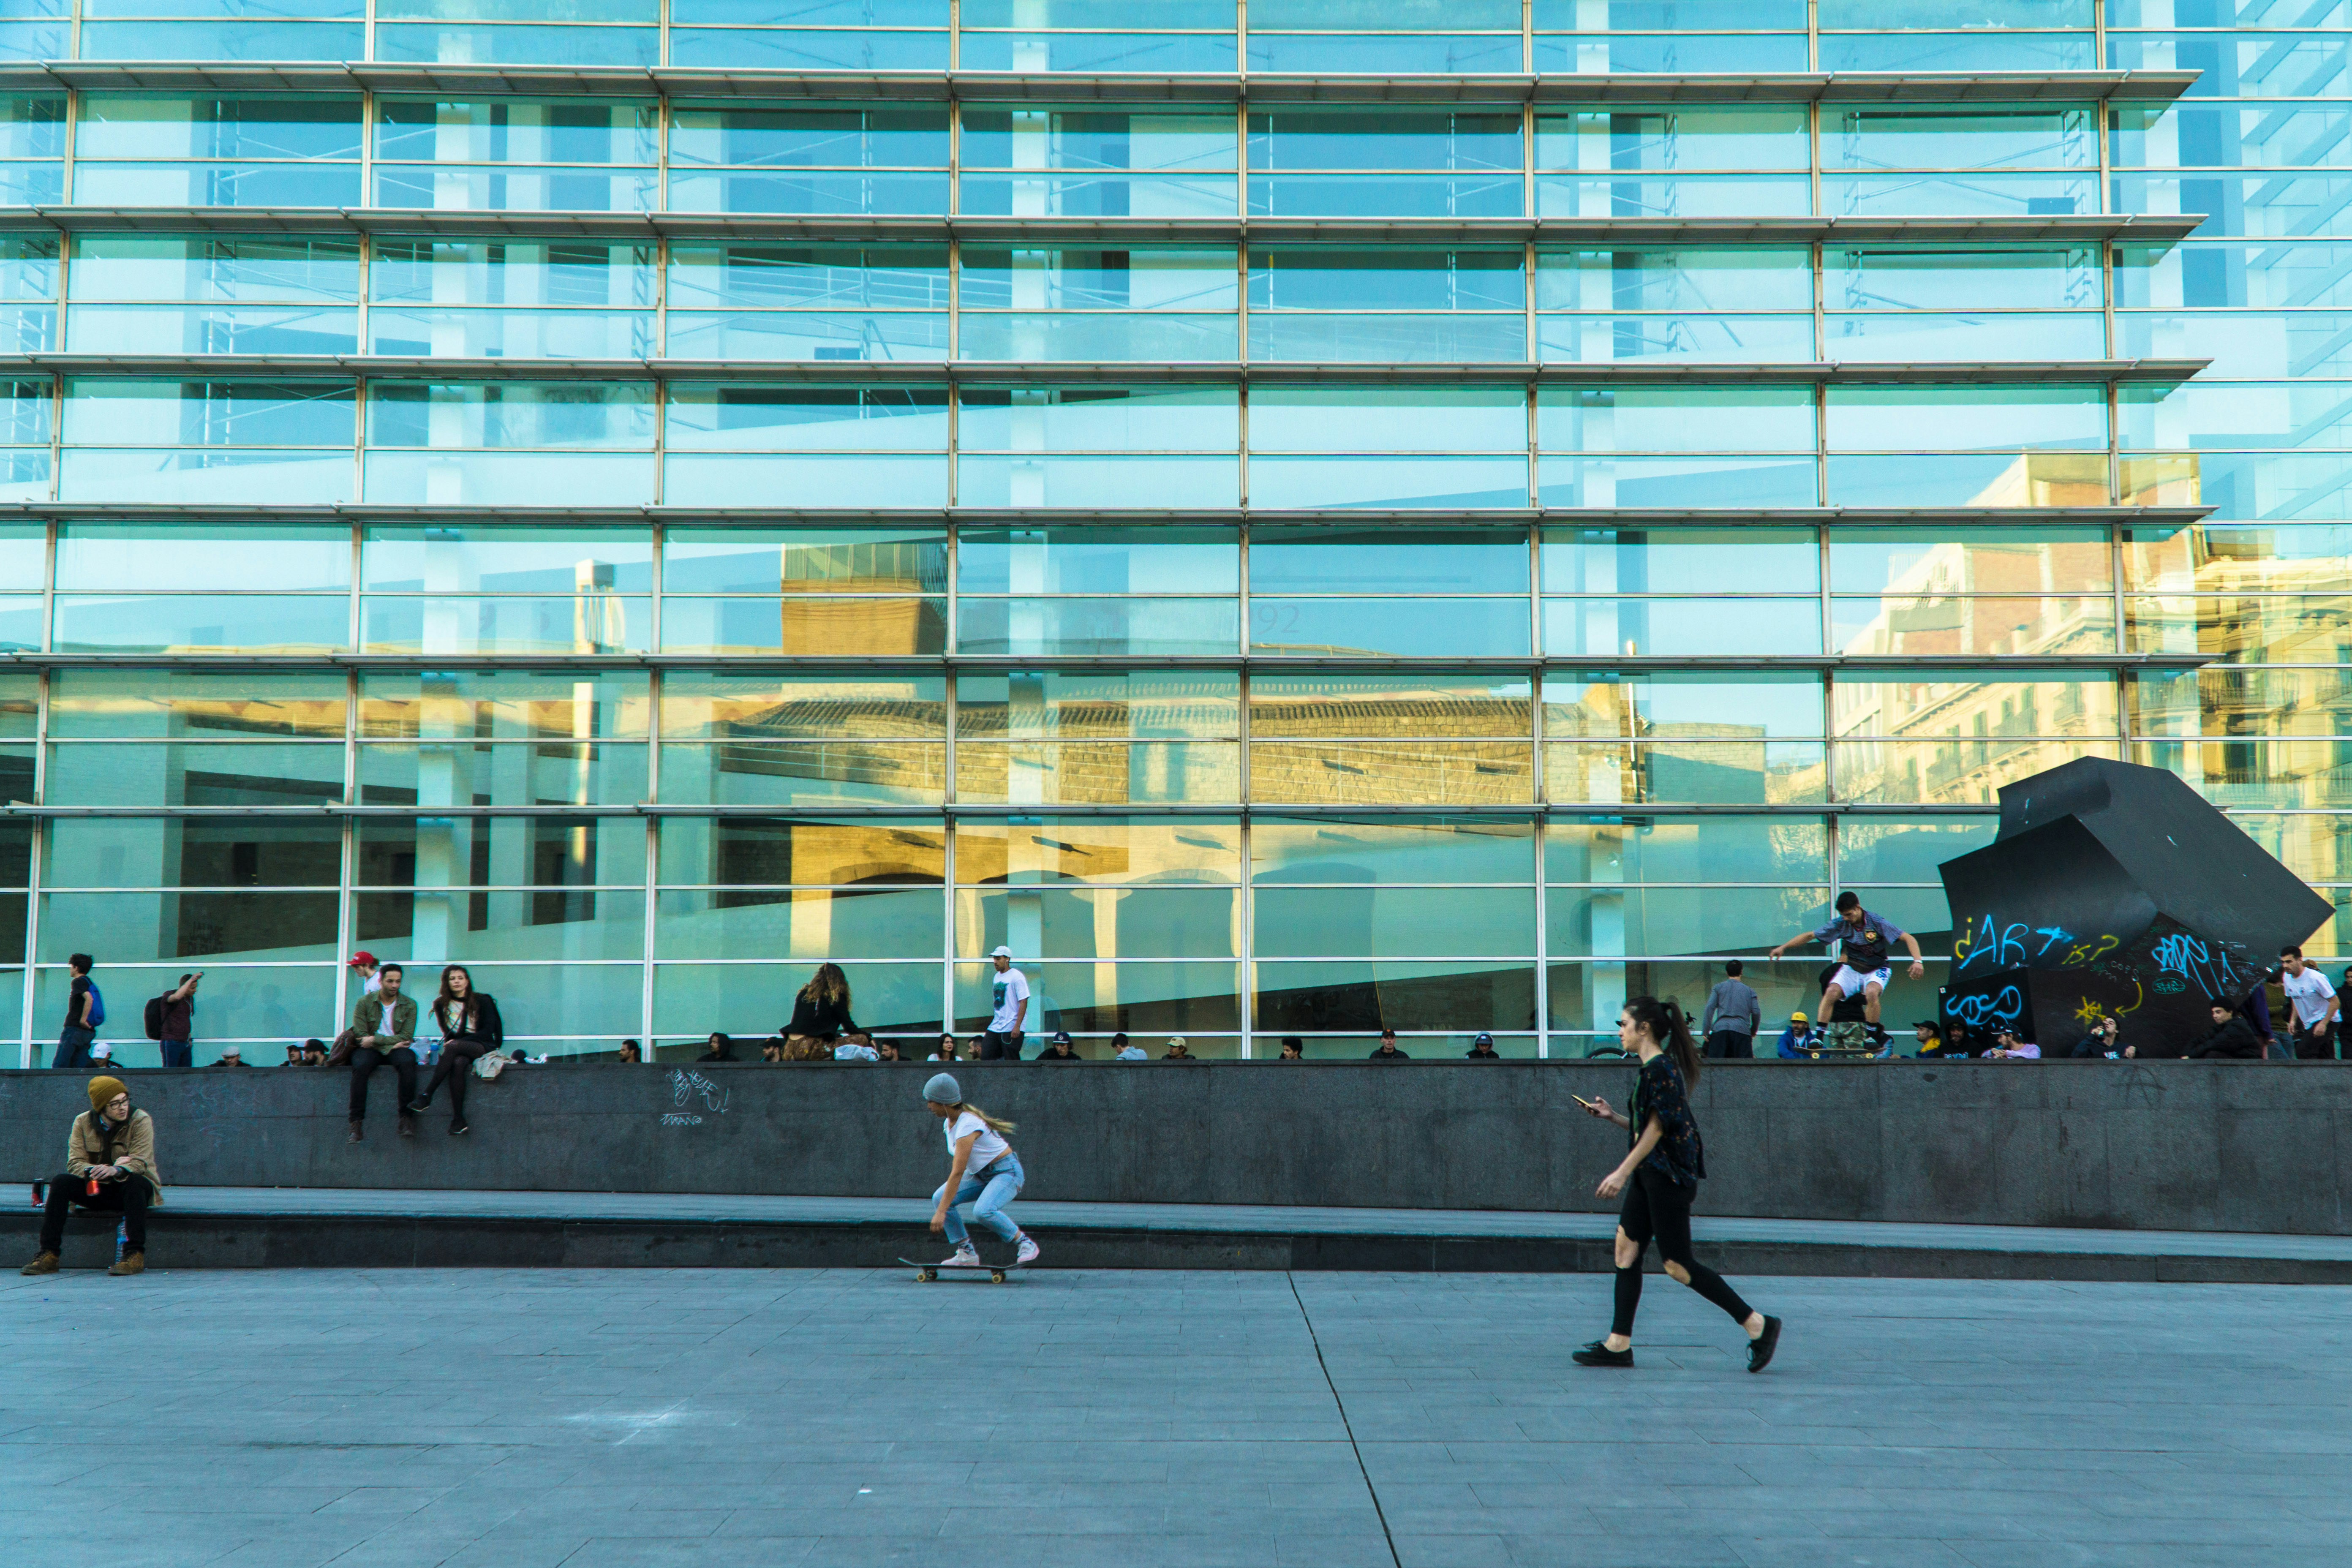 A typical day in MACBA, Barcelona's hotspot for art, urban culture and skate.